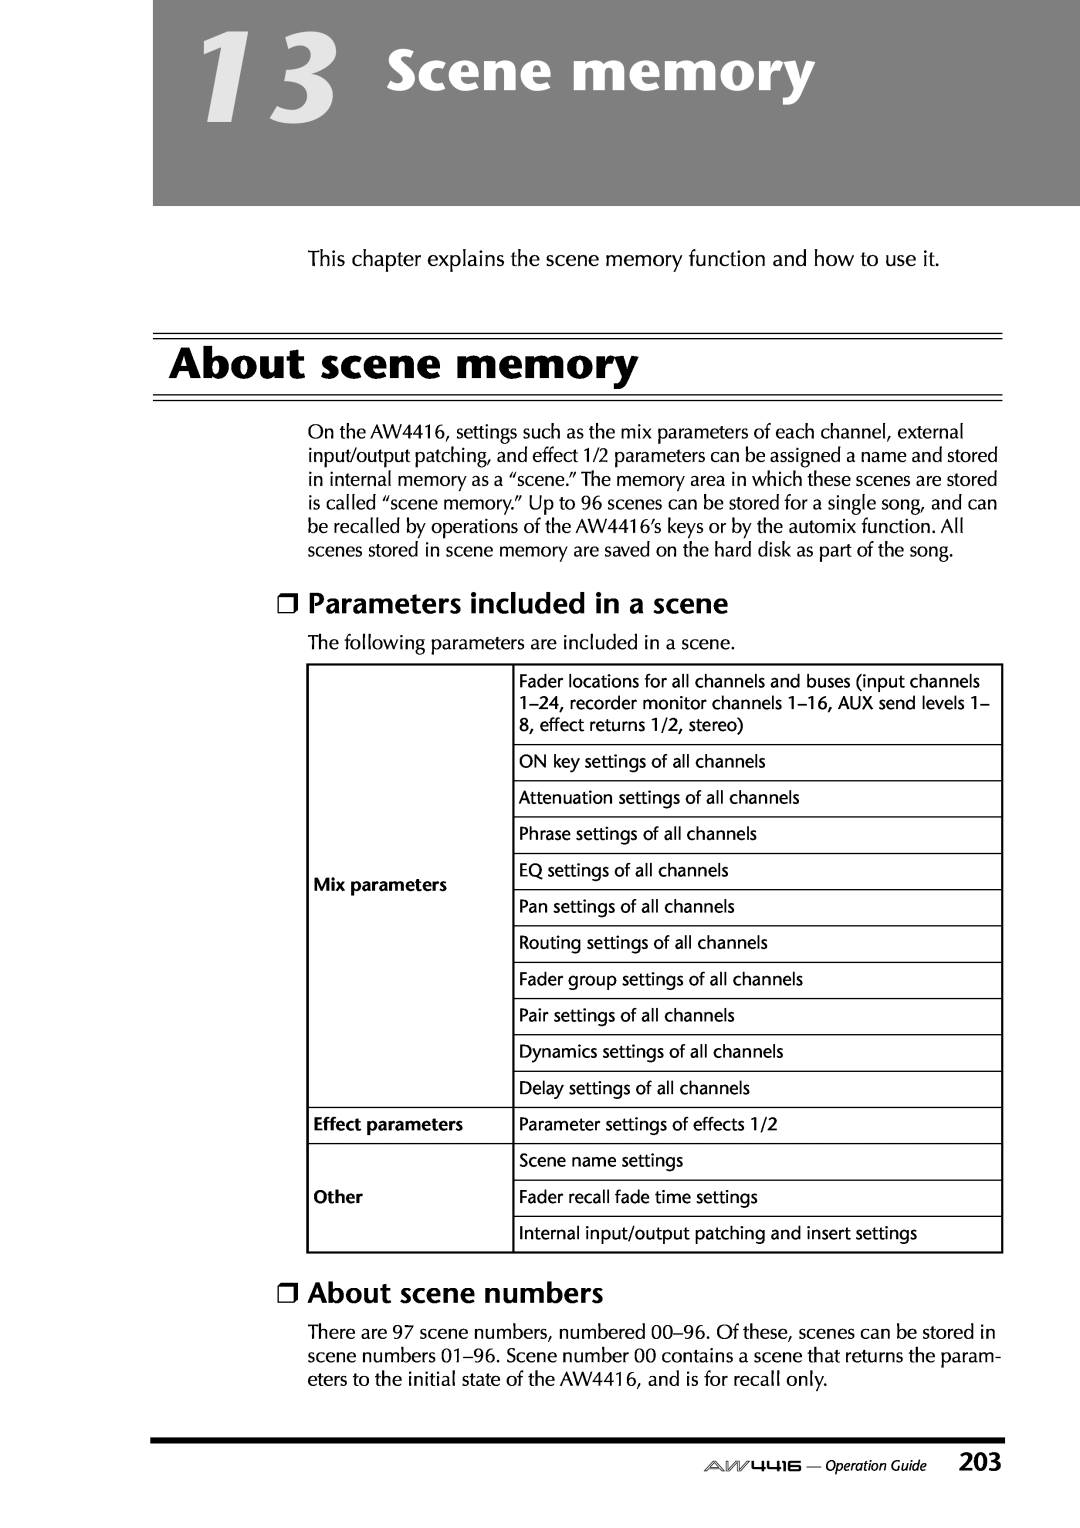 Yamaha AW4416 manual Scene memory, About scene memory, Parameters included in a scene, About scene numbers 